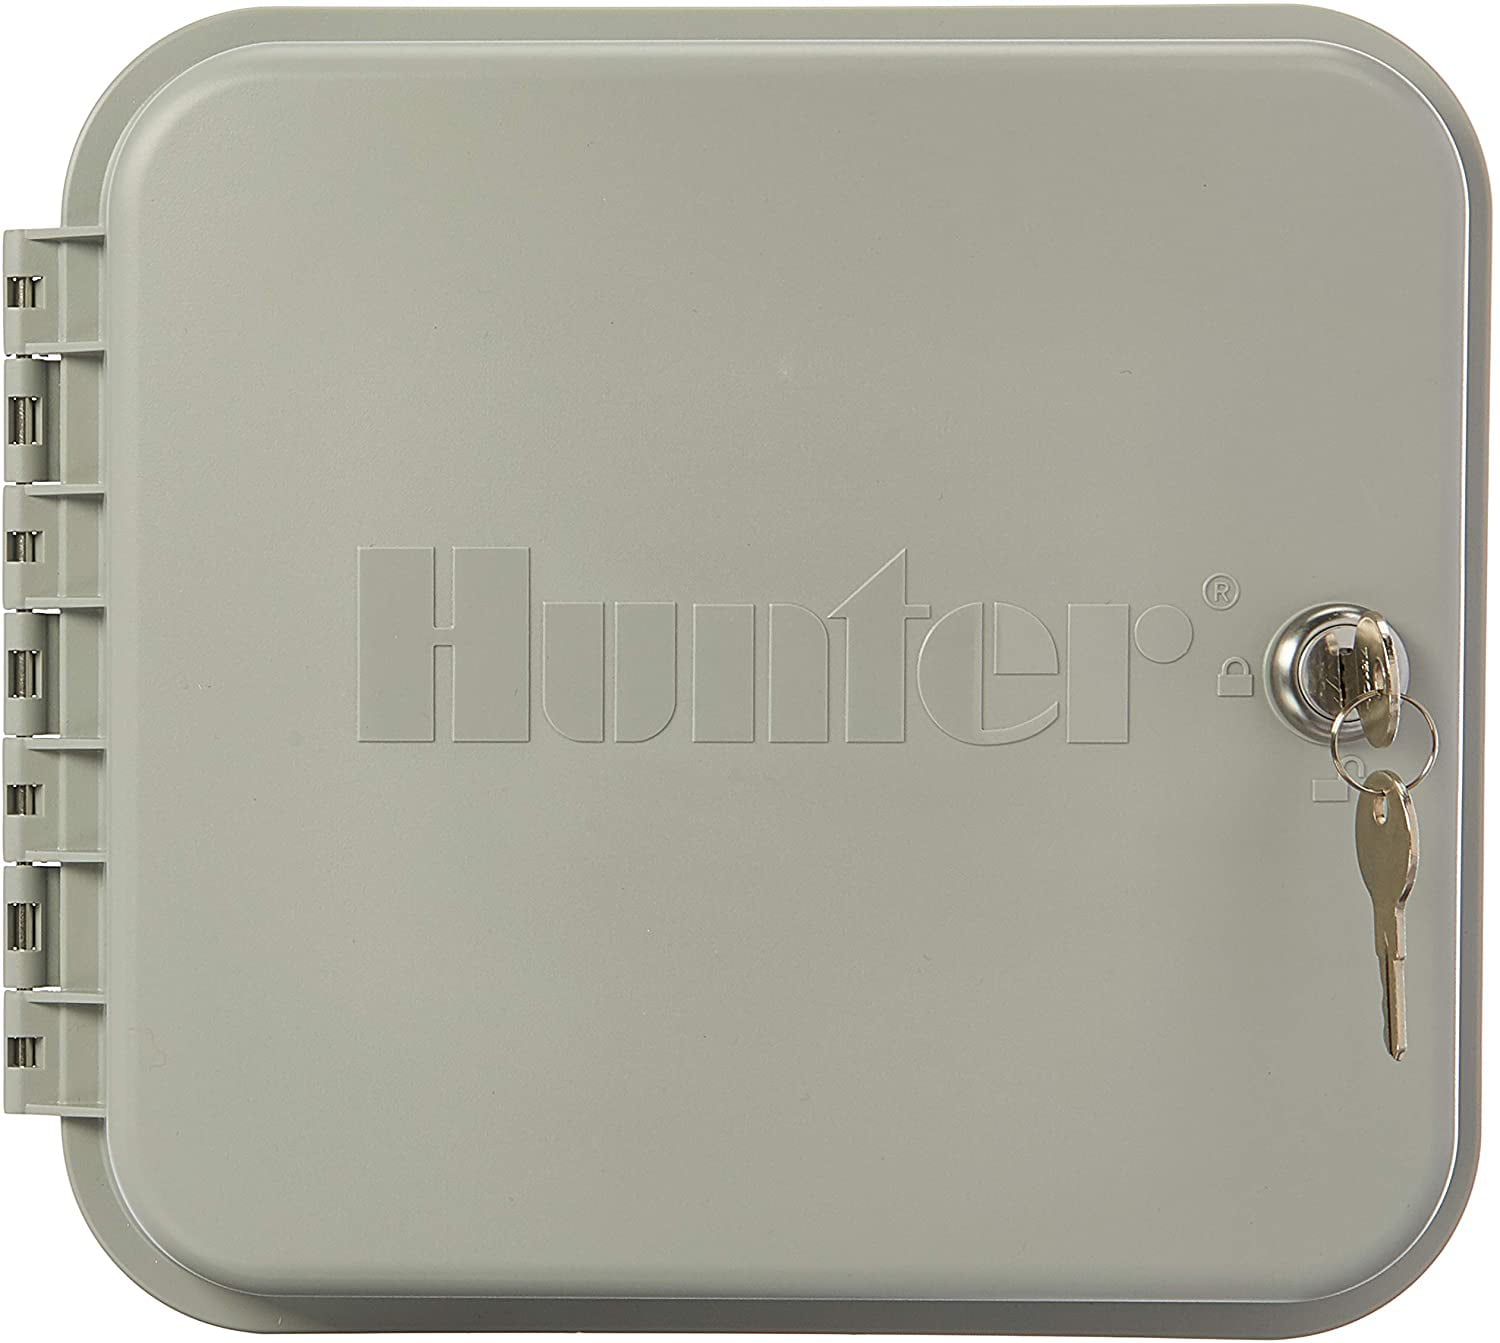 Hunter Pro-c Pc-400 4 Zone Base Controller Outdoor Model for sale online 